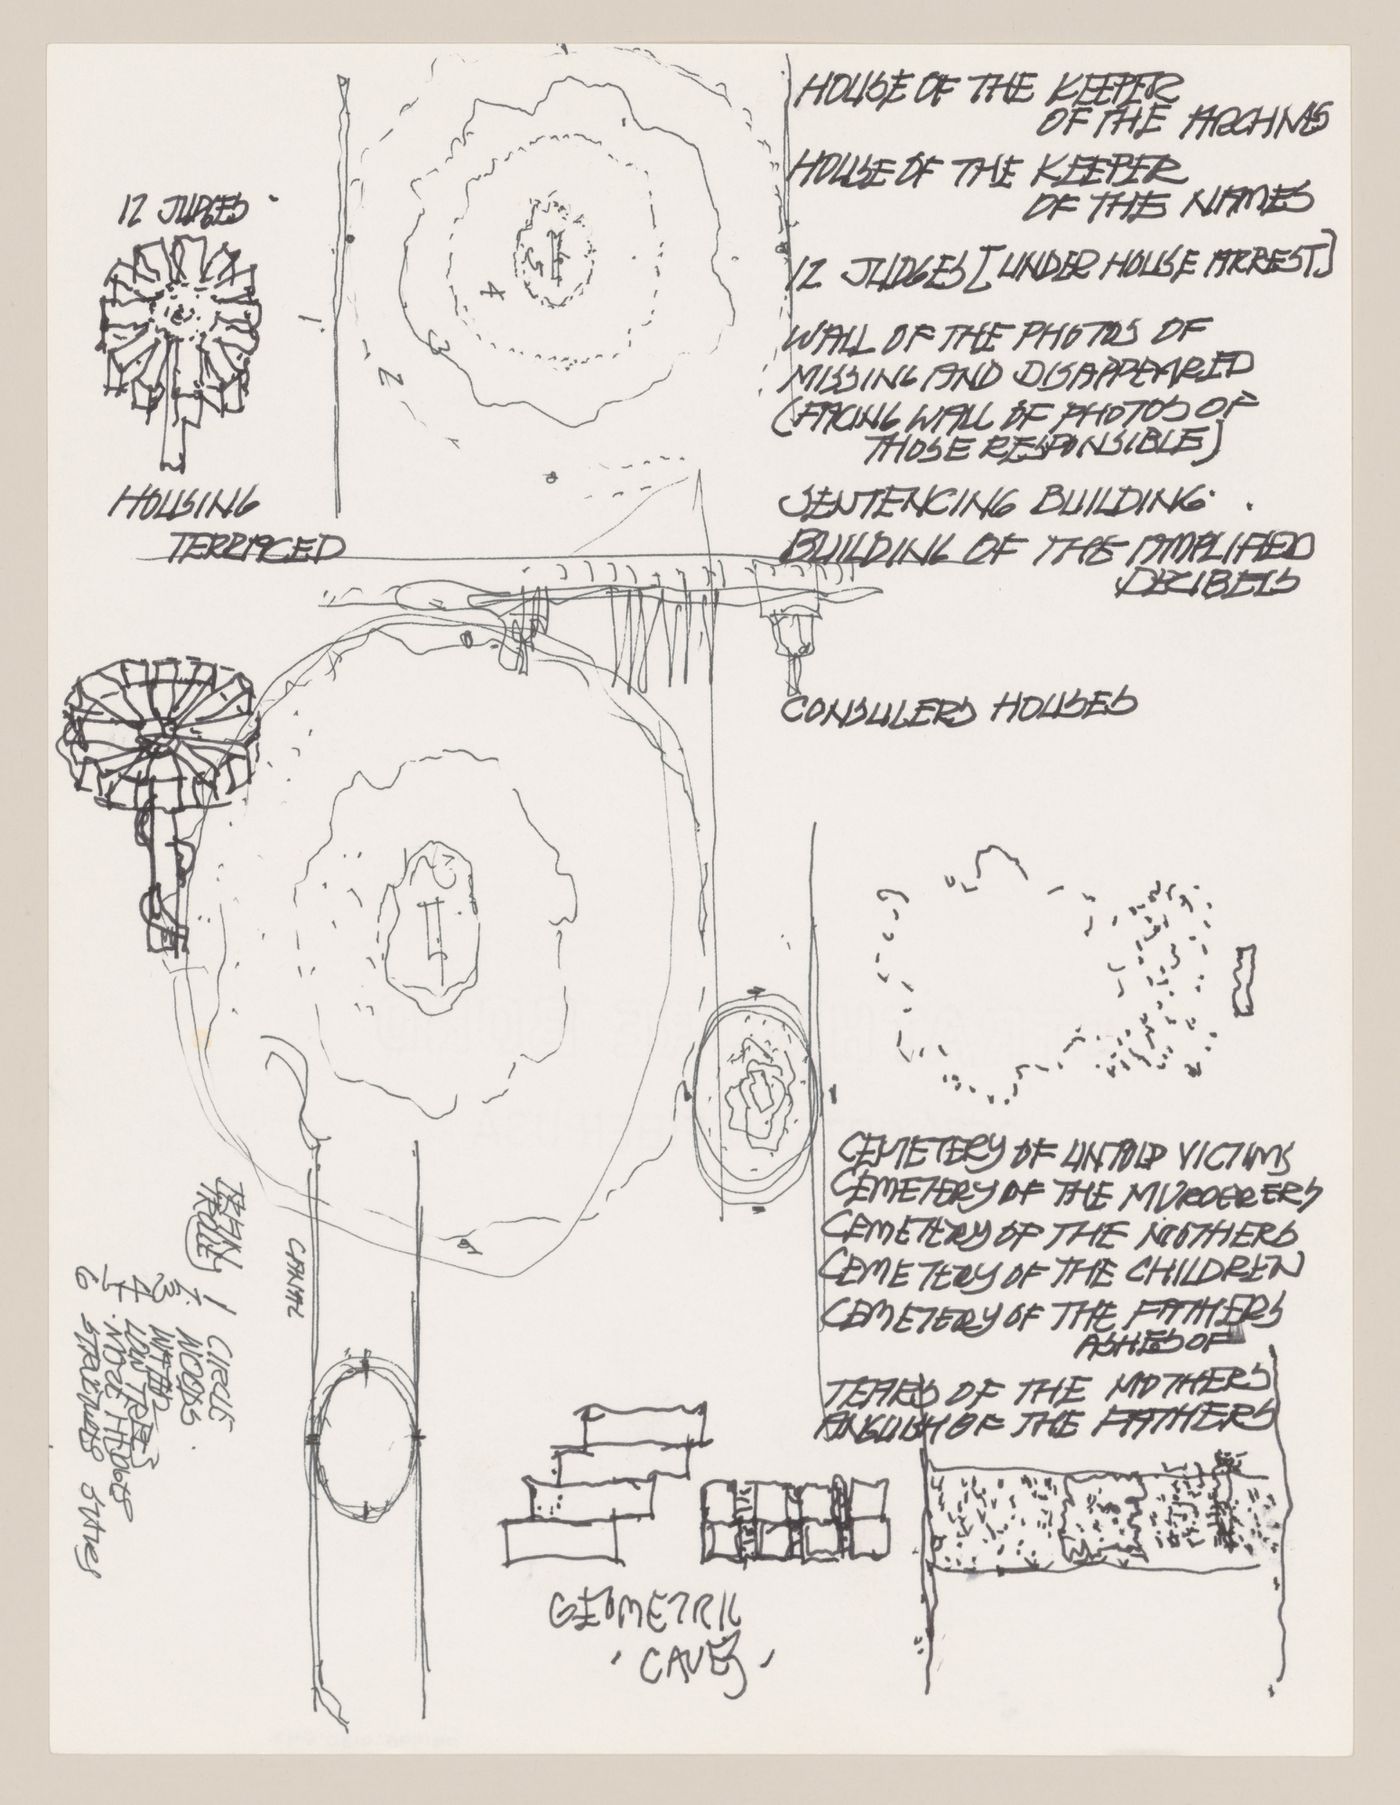 Sketches and notes for Victims II